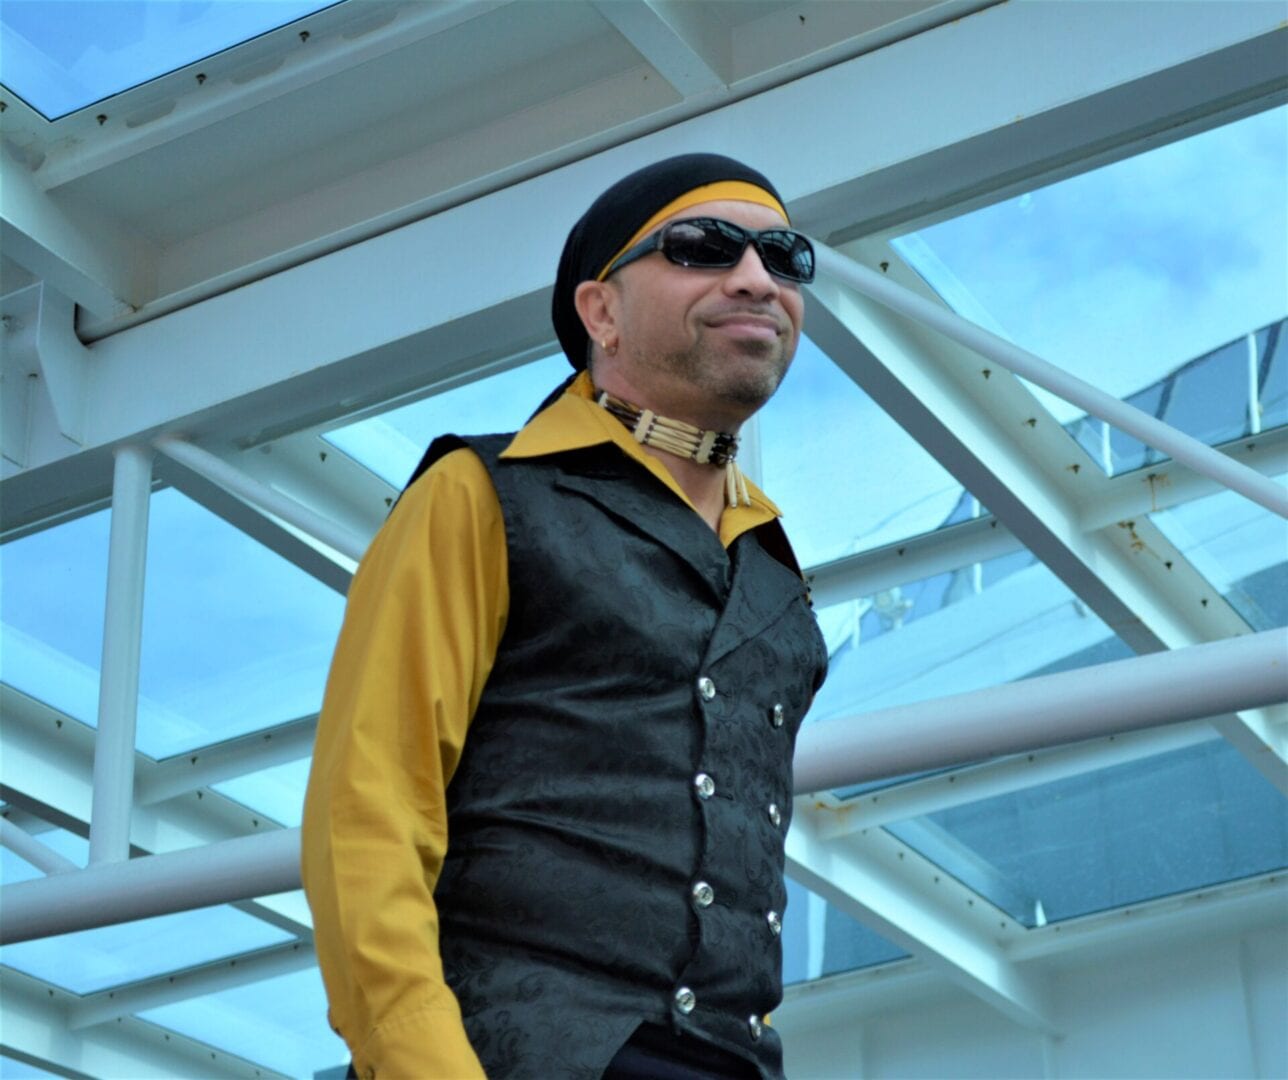 A man in black and yellow shirt standing next to a building.